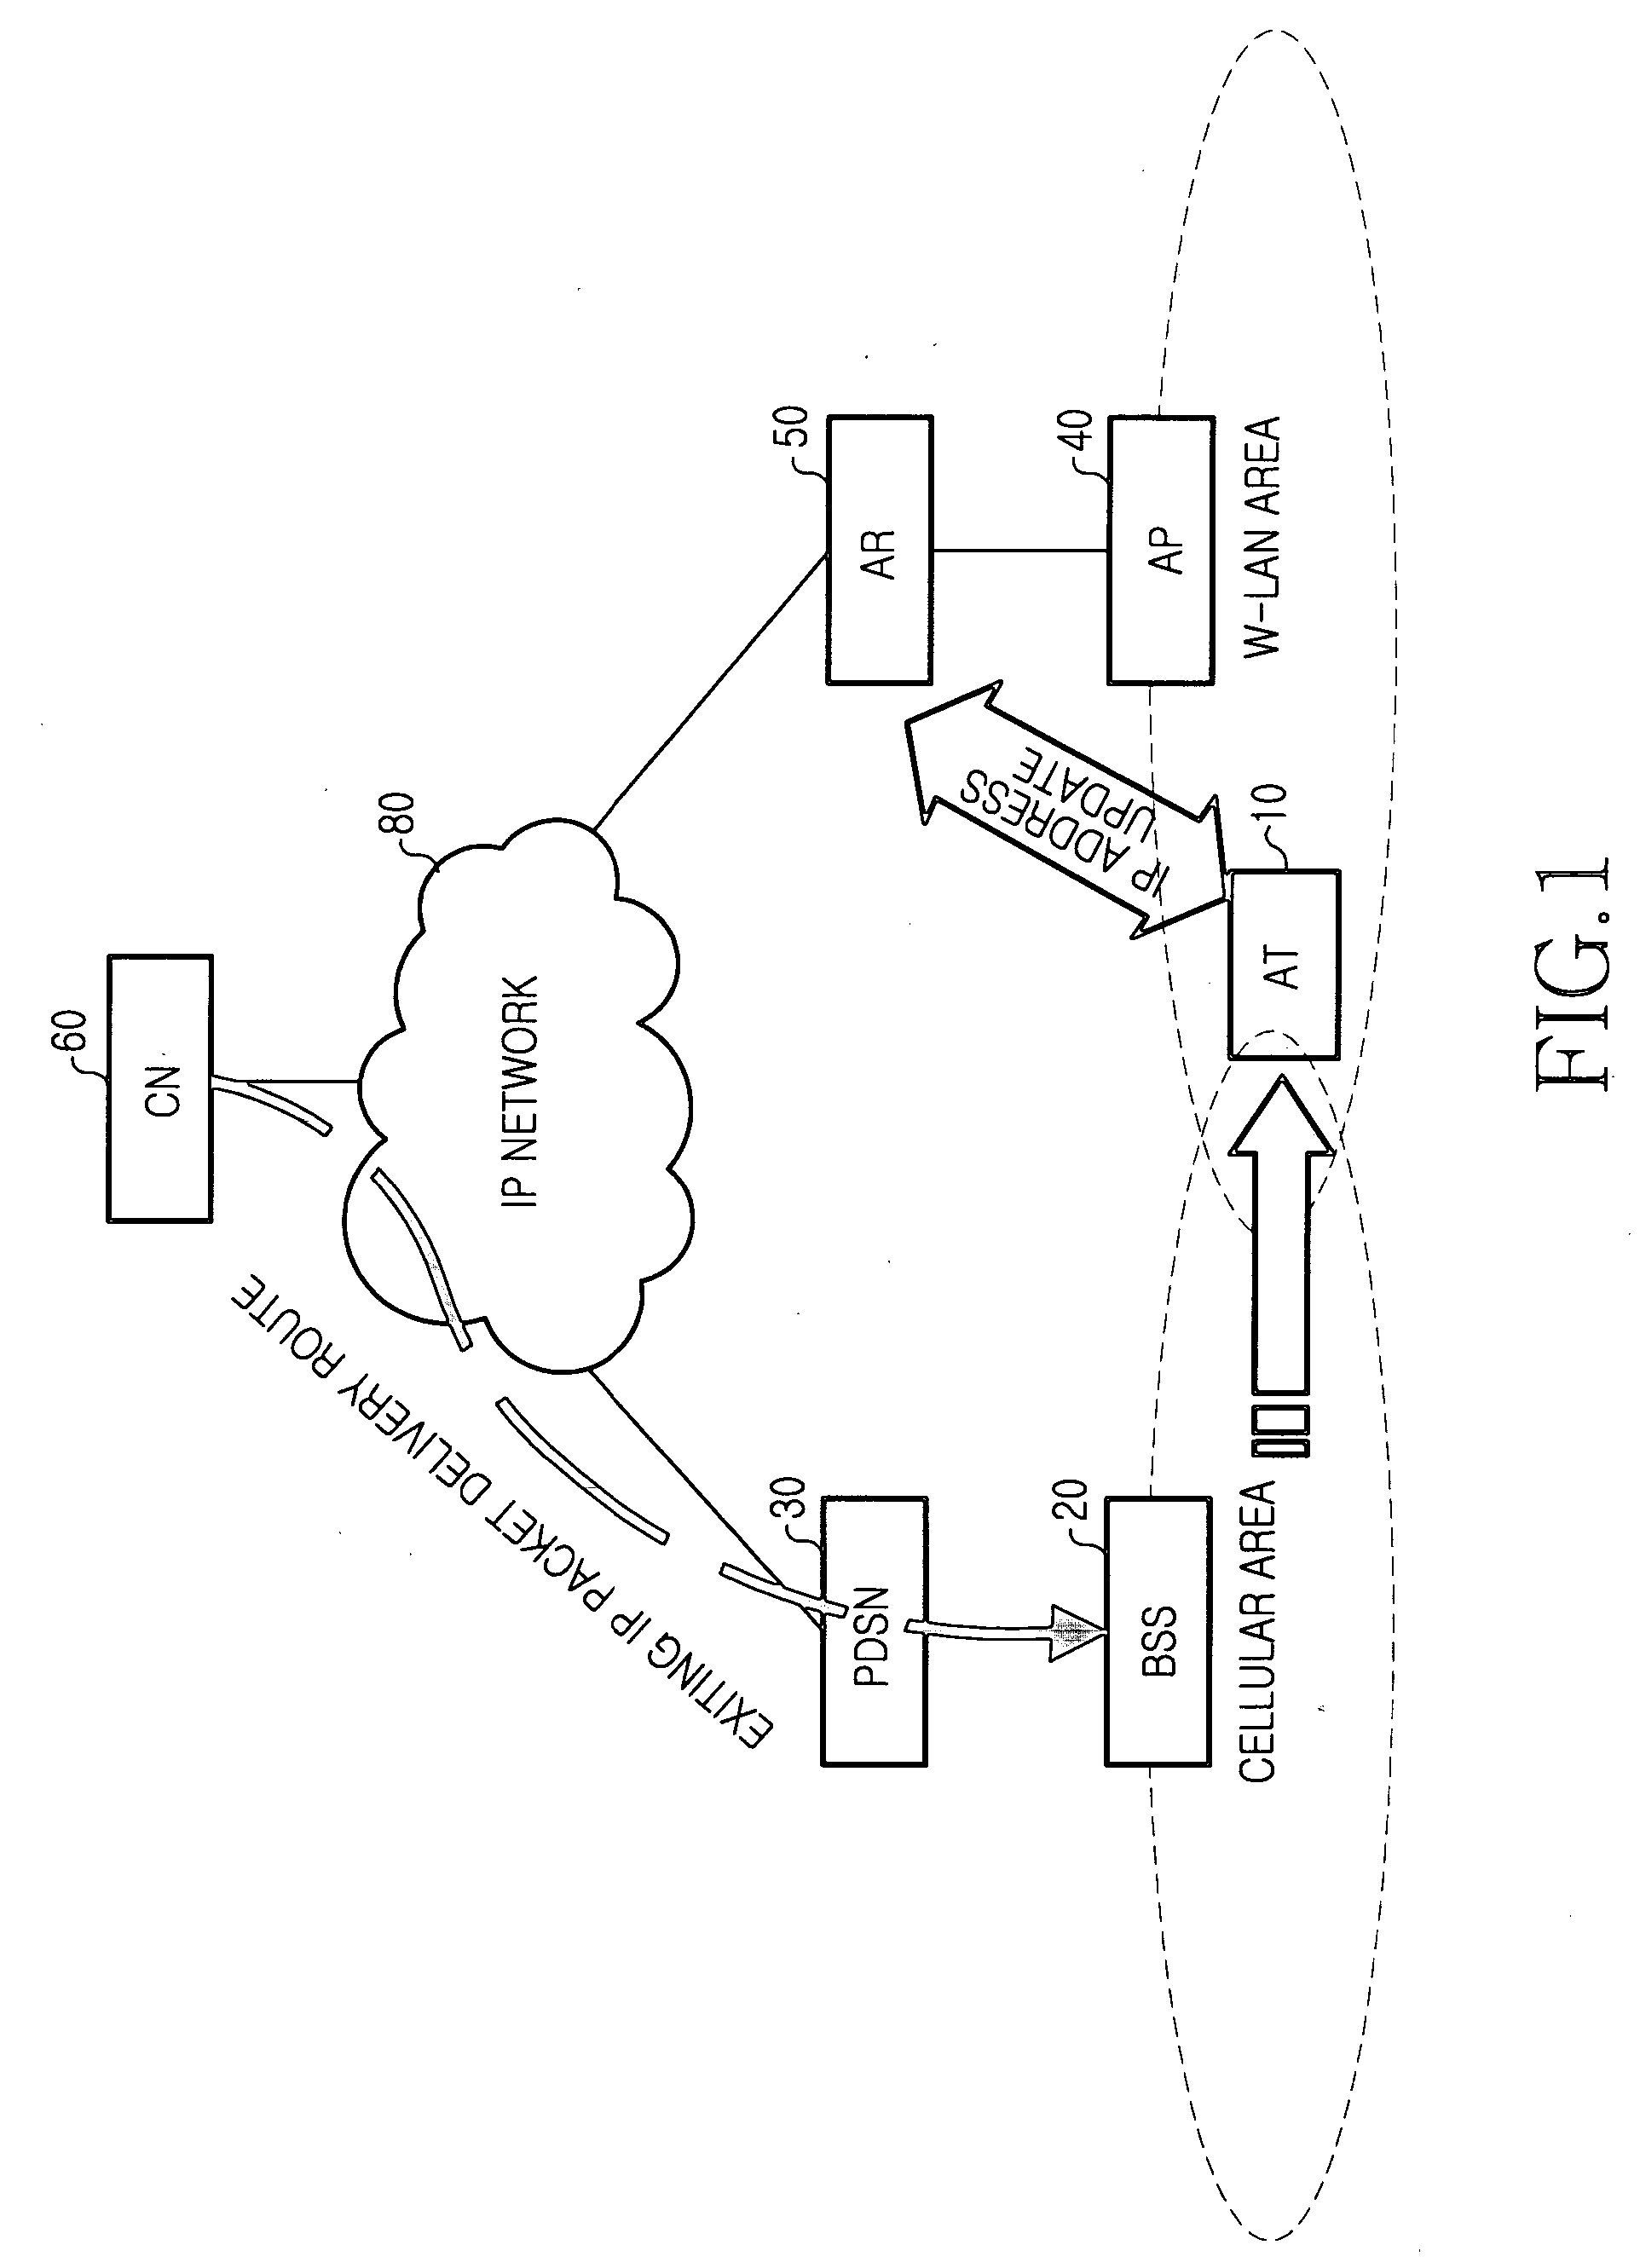 Handoff system and method between mobile communication network and wireless LAN